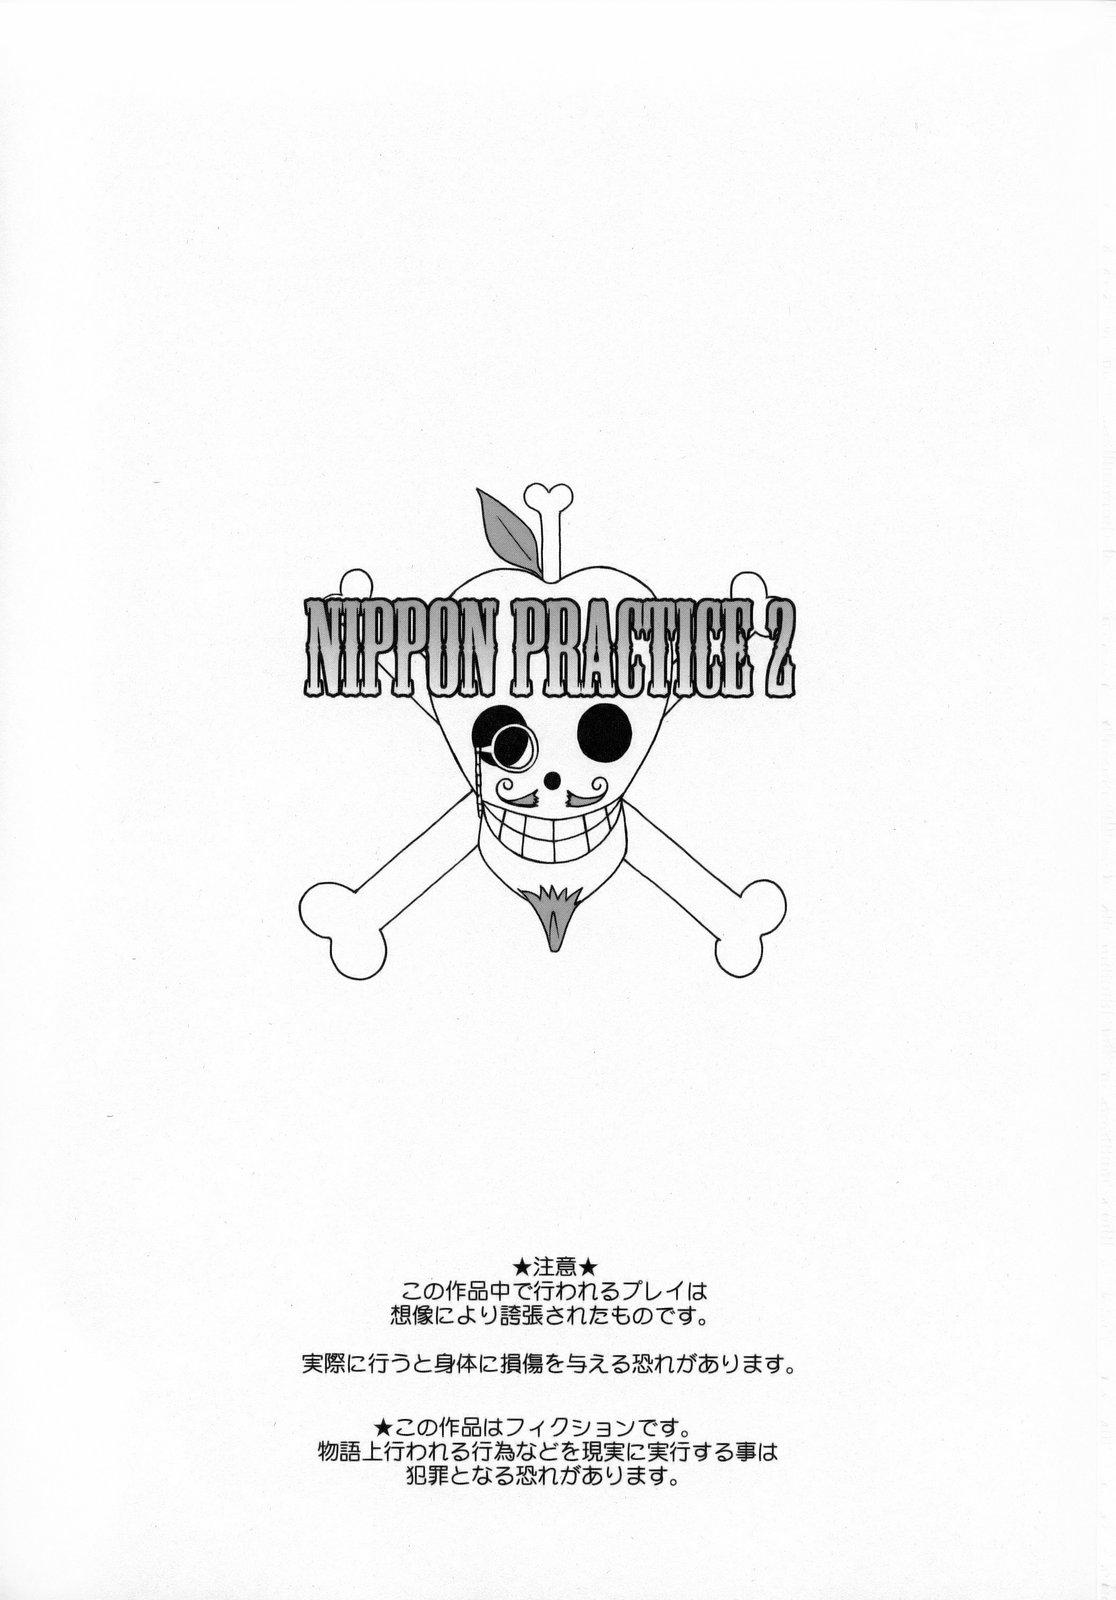 18yearsold Nippon Practice 2 - One piece Police - Page 2